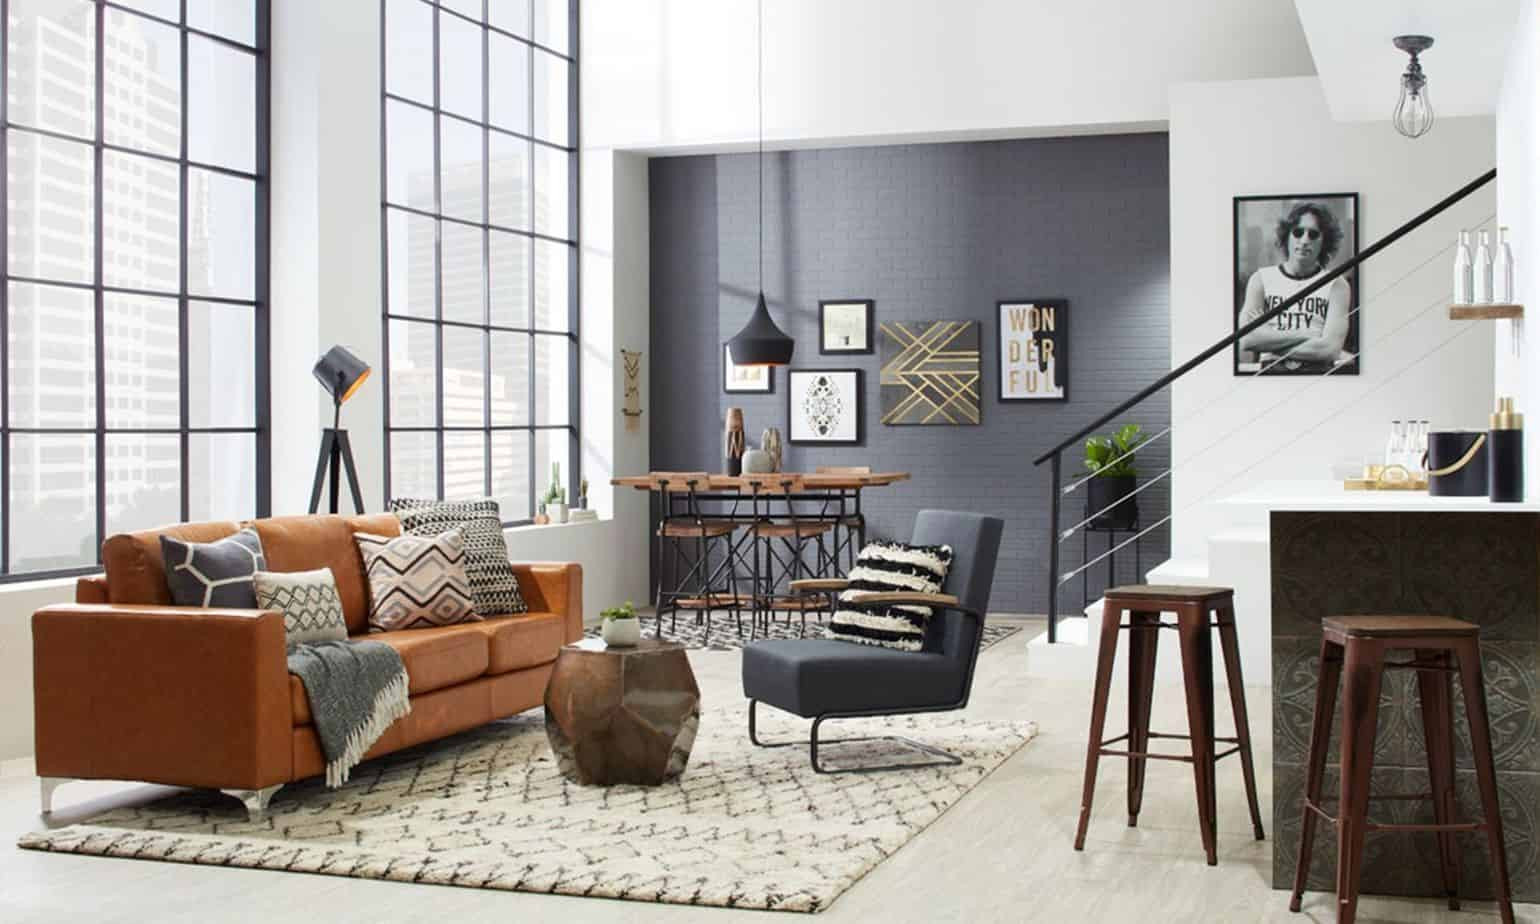 Modern Industrial Living Room
 Living Room Trends 2021 Best 9 Interior Ideas and Styles